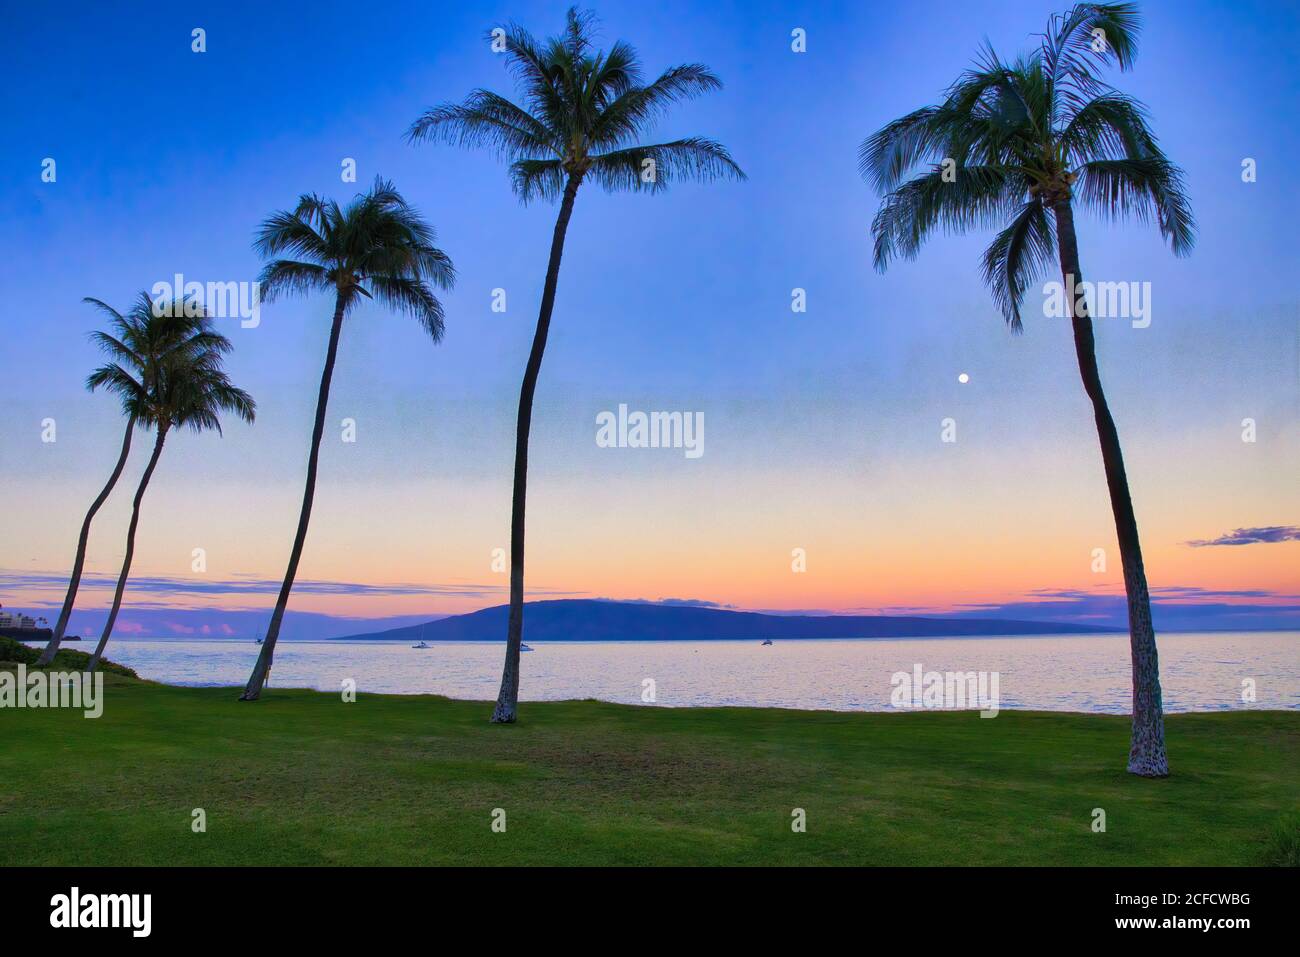 Peaceful view of airport beach at sunrise with full moon setting beyond palm trees. Stock Photo